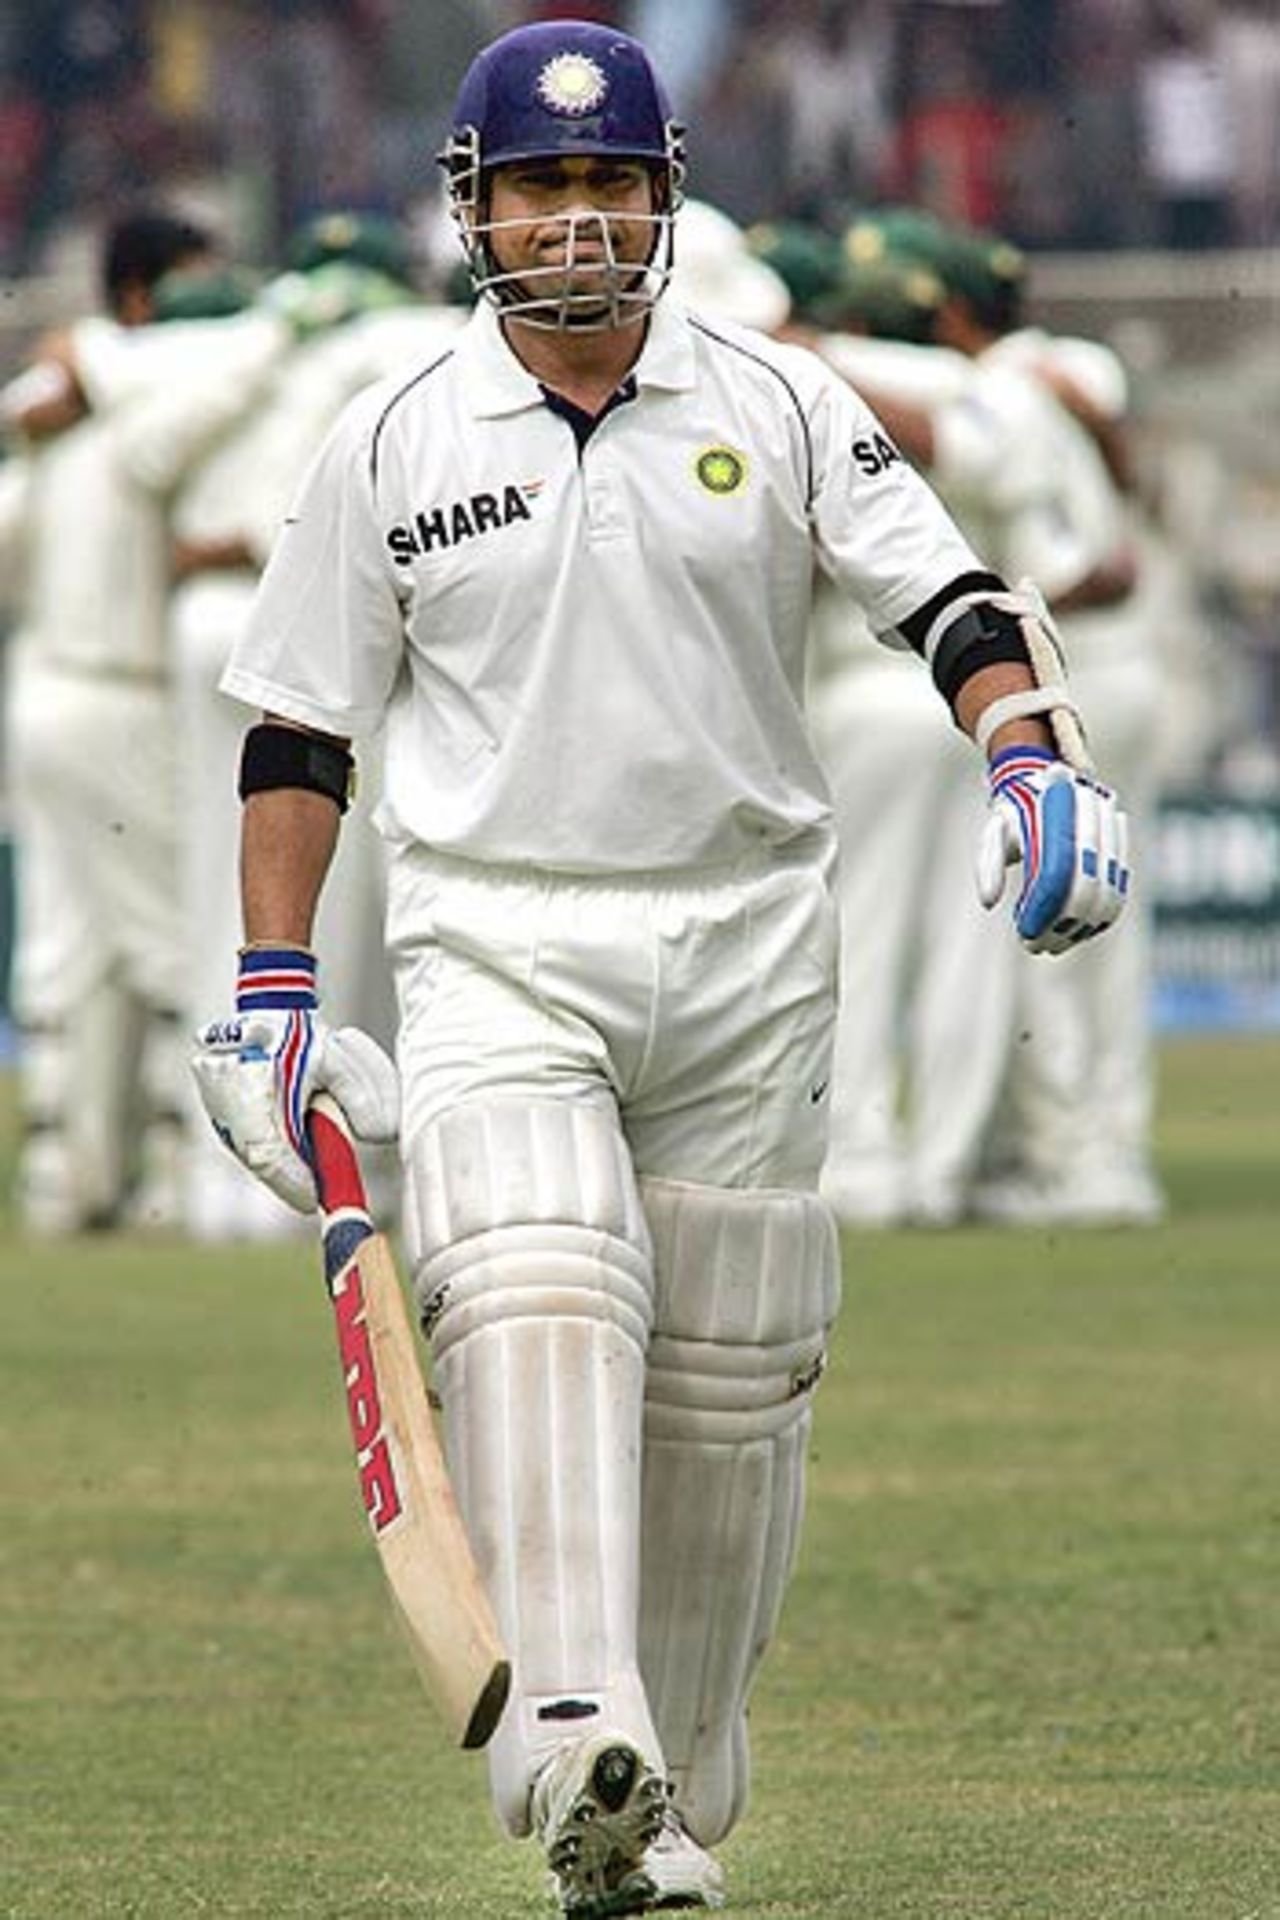 Sachin Tendulkar is due a big score and Mumbai could be the place